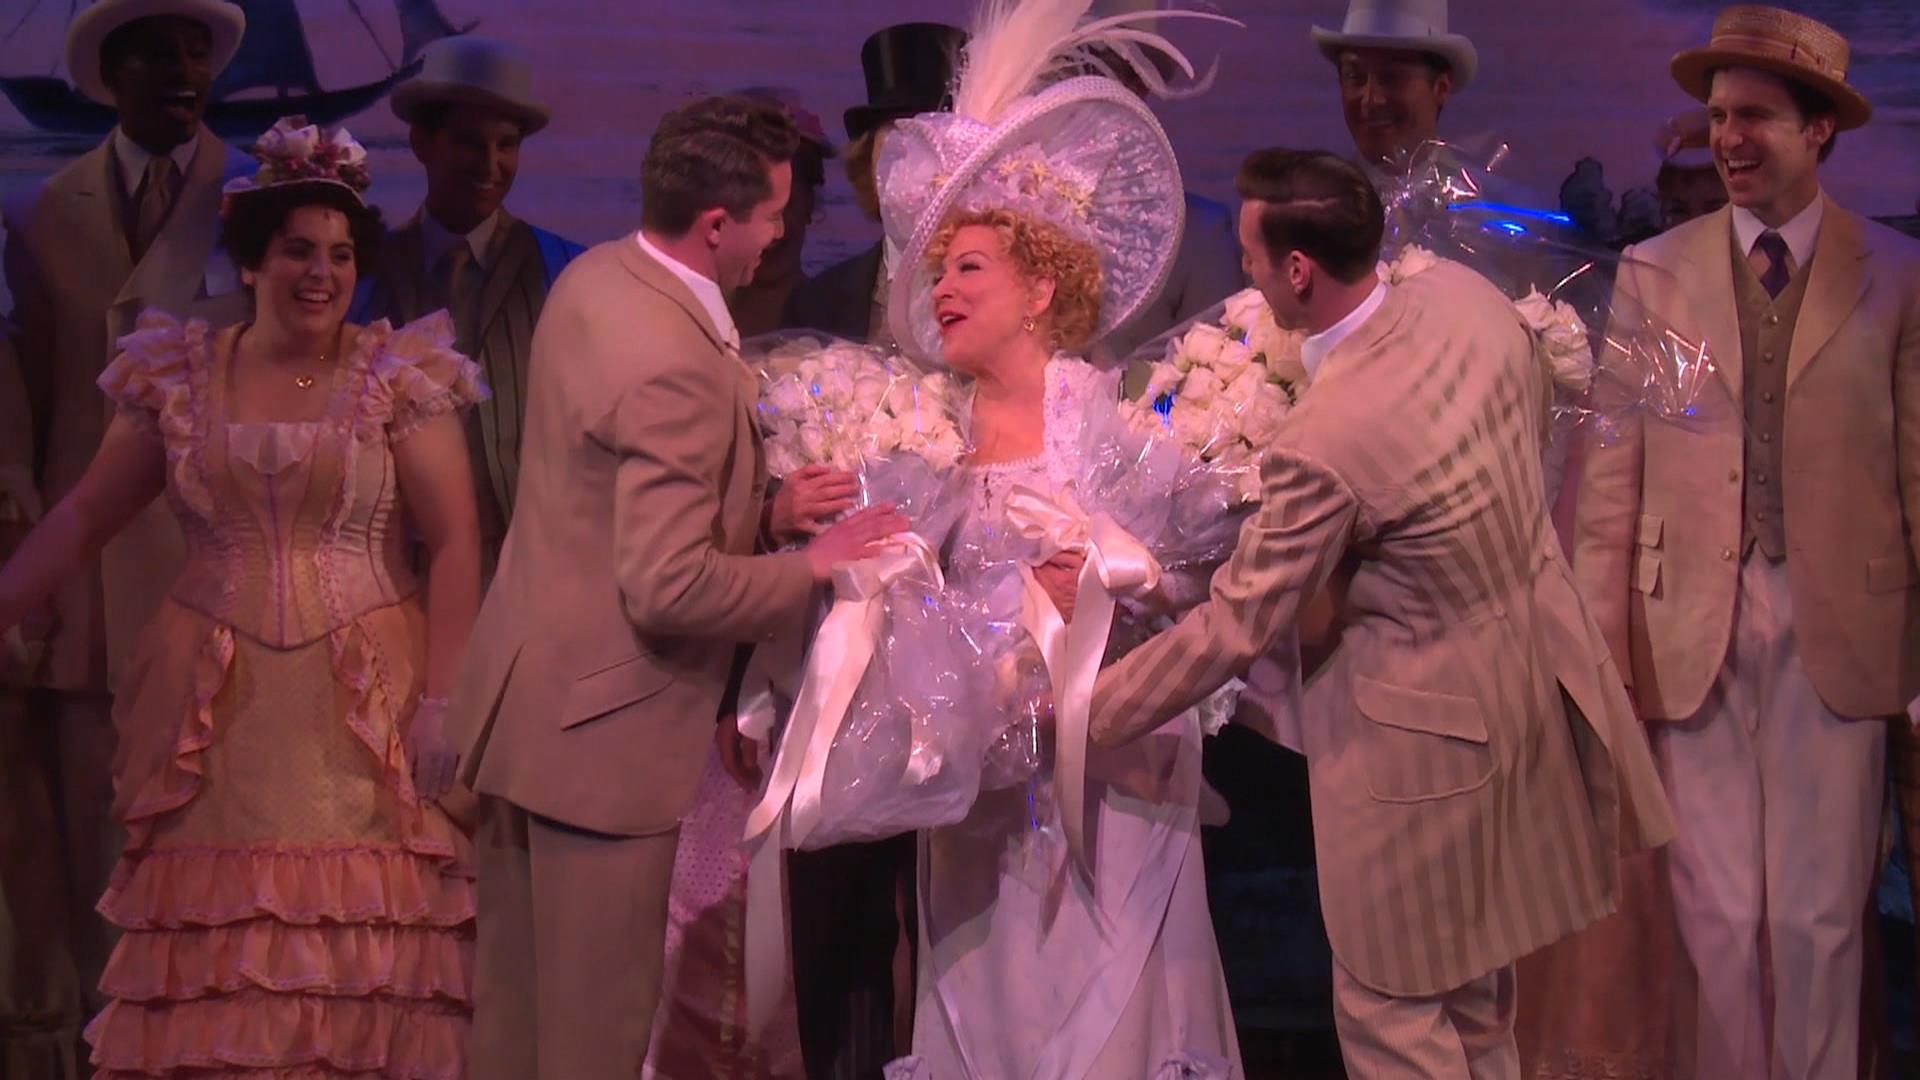 Bette Midler returns to Broadway in ‘Hello Dolly